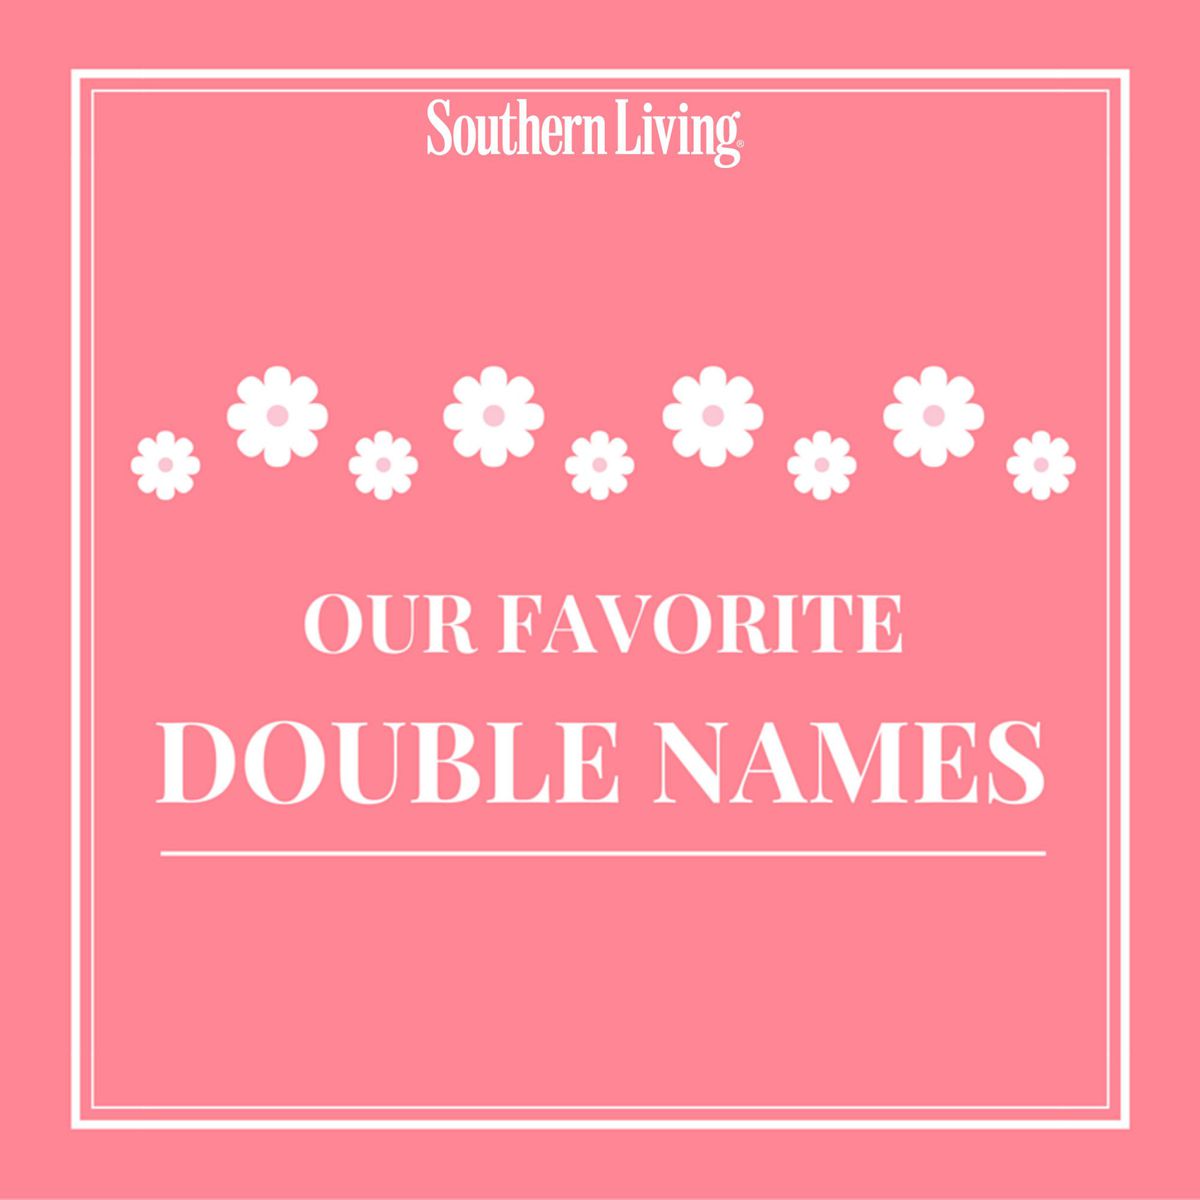 Our Favorite Double Names Southern Living